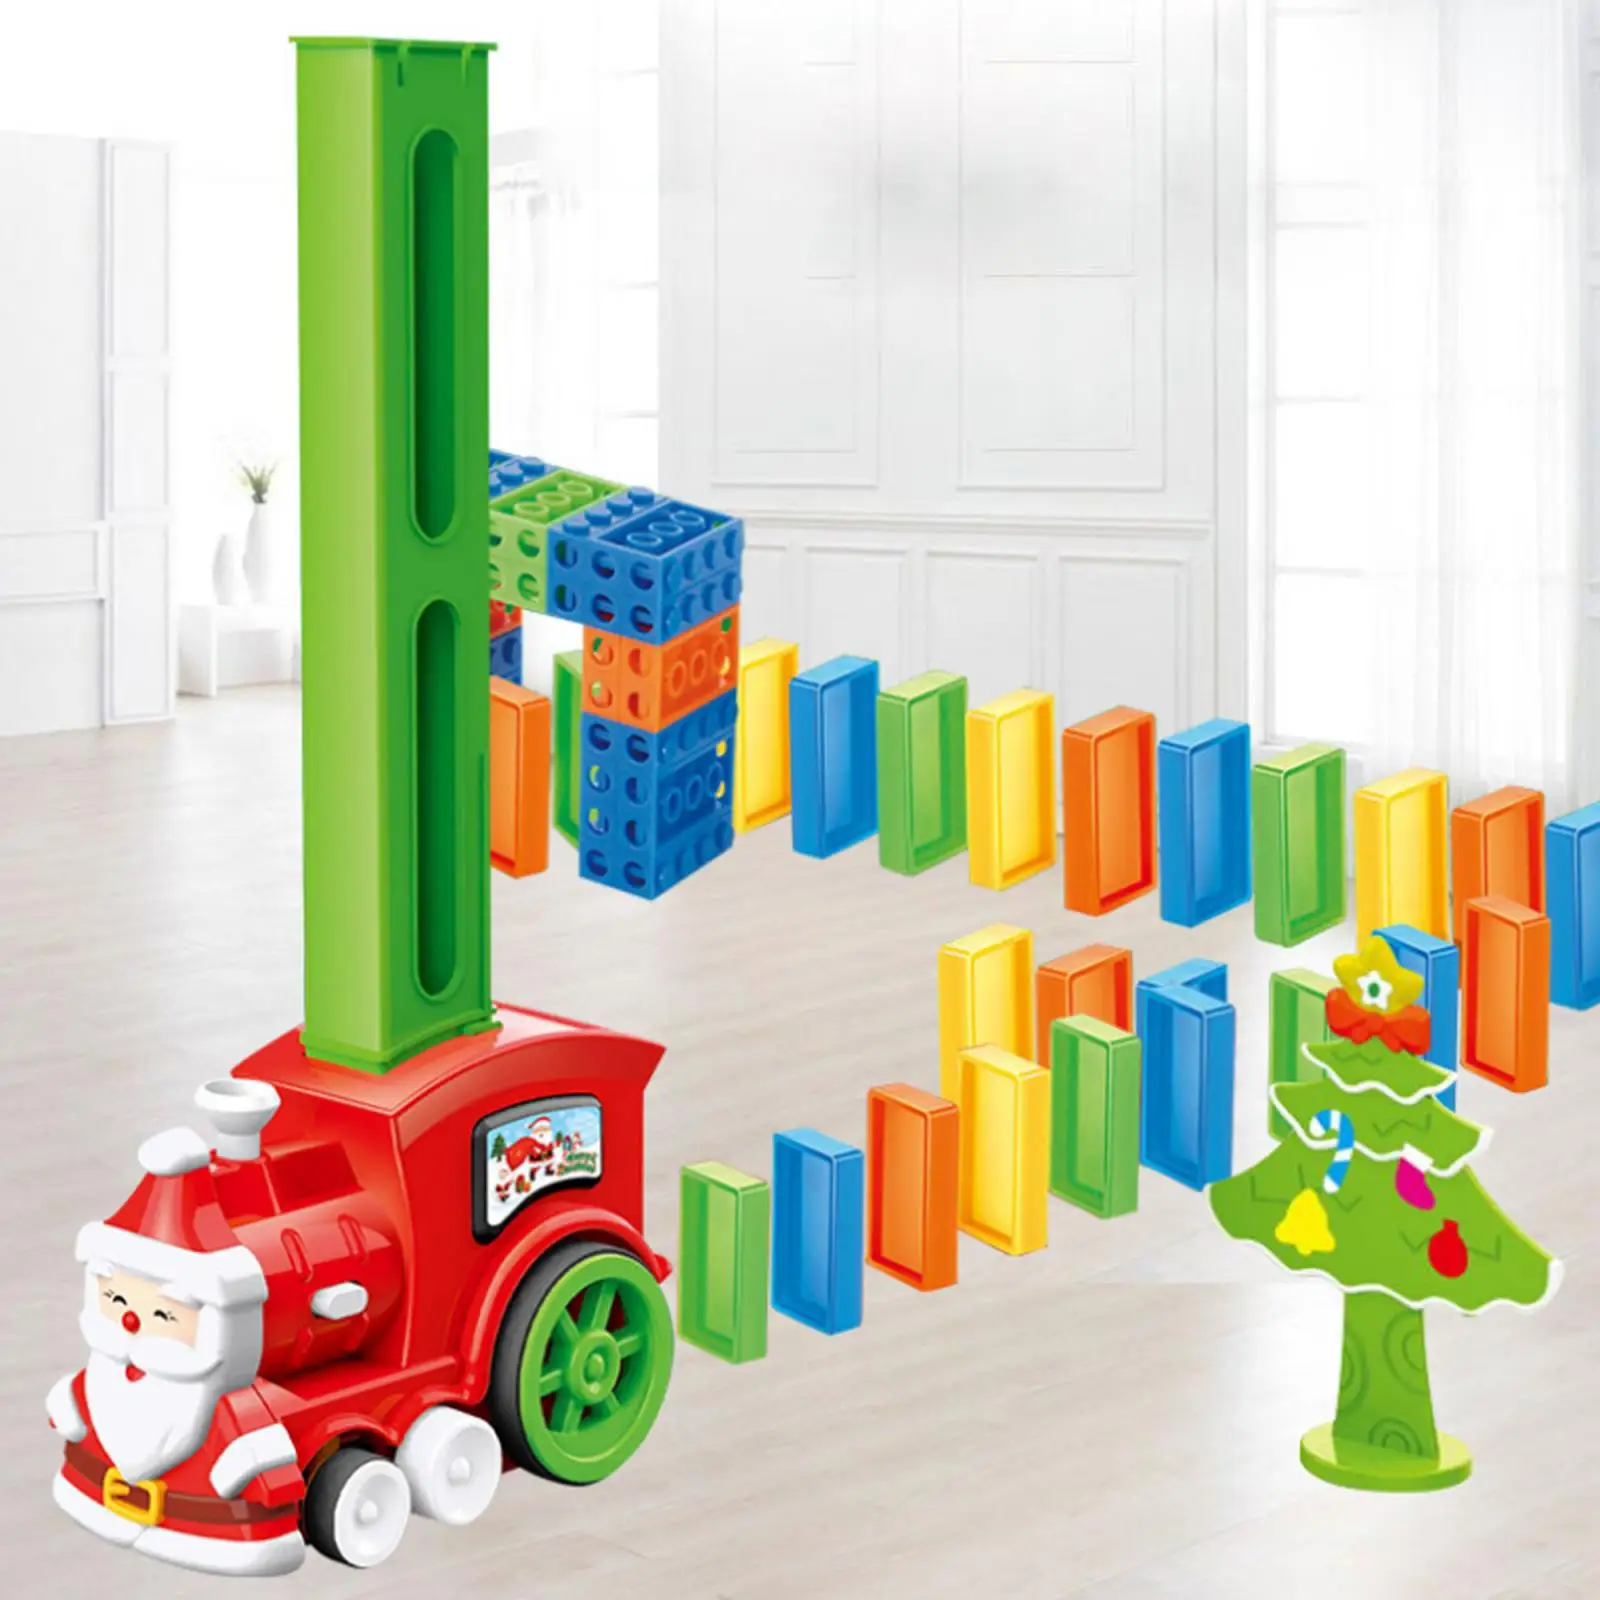 Electric Domino Train Automatic Laying 90pcs Dominoes Stacking Educational Toys 